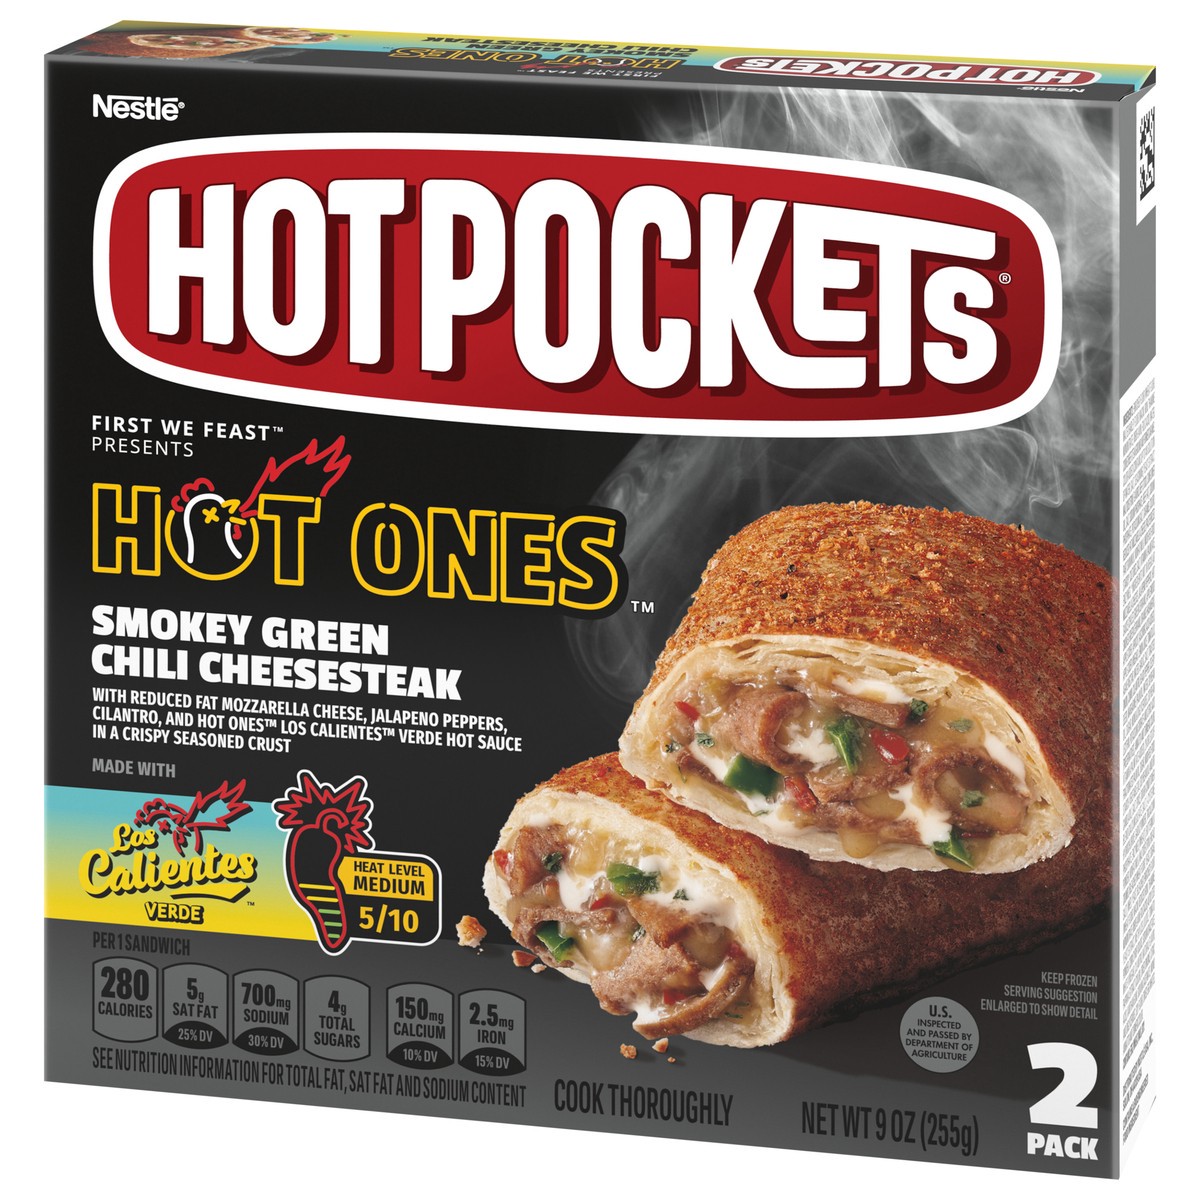 slide 3 of 9, Hot Pockets Hot Ones Smokey Green Chili Cheesesteak Frozen Snacks in a Crispy Buttery Crust, Steak and Cheese Sandwiches Made with Real Cheddar Cheese, 2 Count Frozen Sandwiches, 2 ct